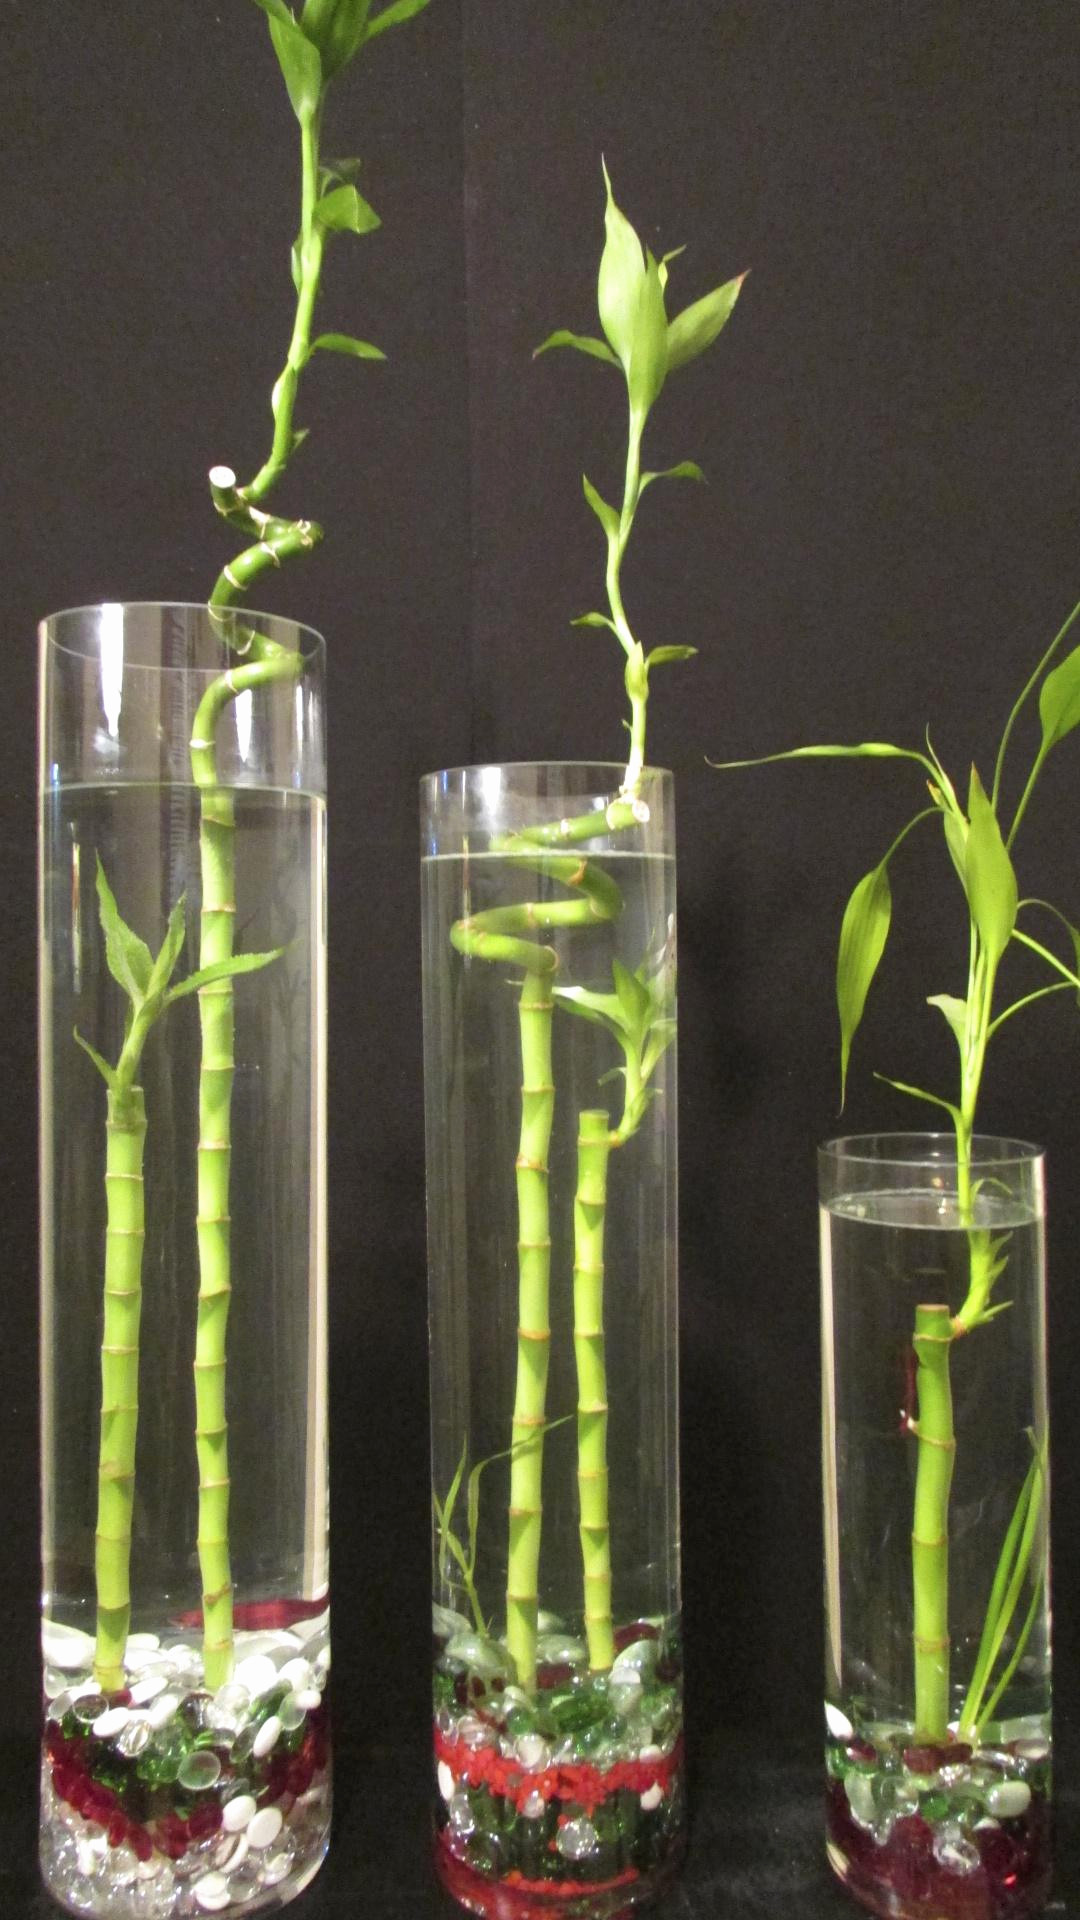 live plants for betta fish vase of bamboo plant for betta fish best of betta lounges tanks creation with bamboo plant for betta fish best of betta lounges tanks creation designs